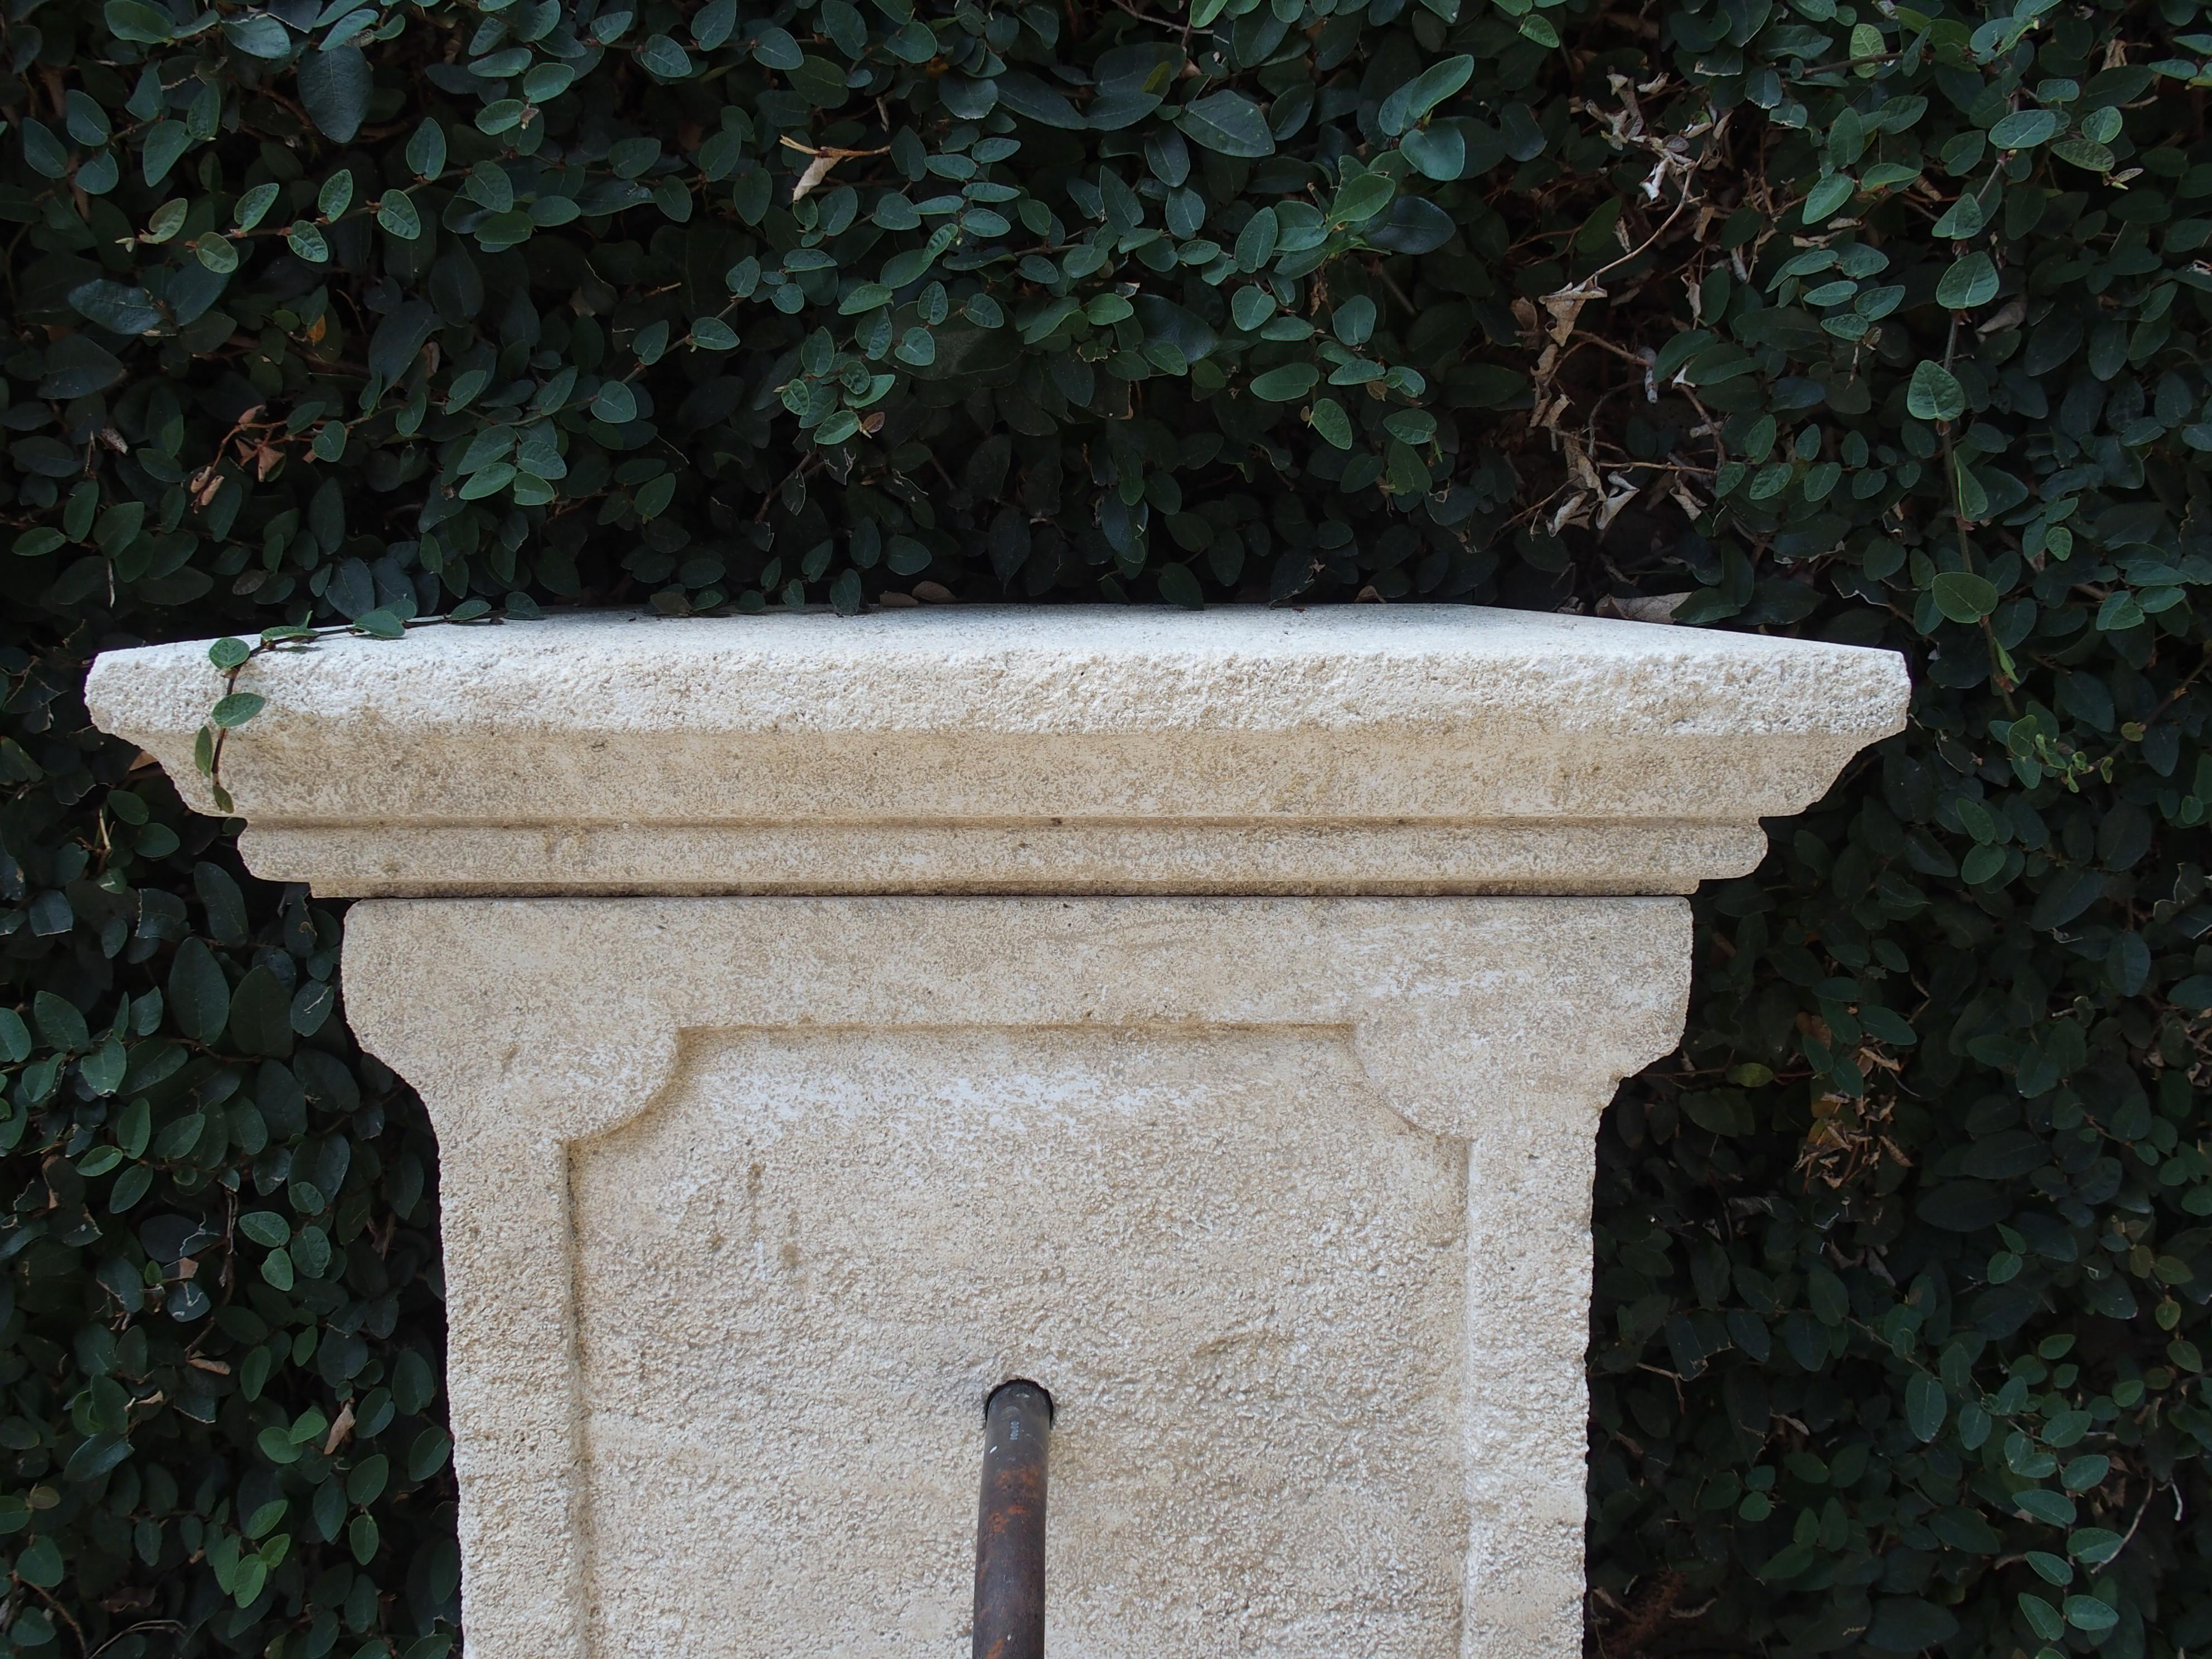 This small wall fountain has been hand-carved in Provence, France. It has an in-carved paneled back with shaped indents which is repeated on the front of the basin portion. The outside shape of the back also mirrors the design of the in- carving.